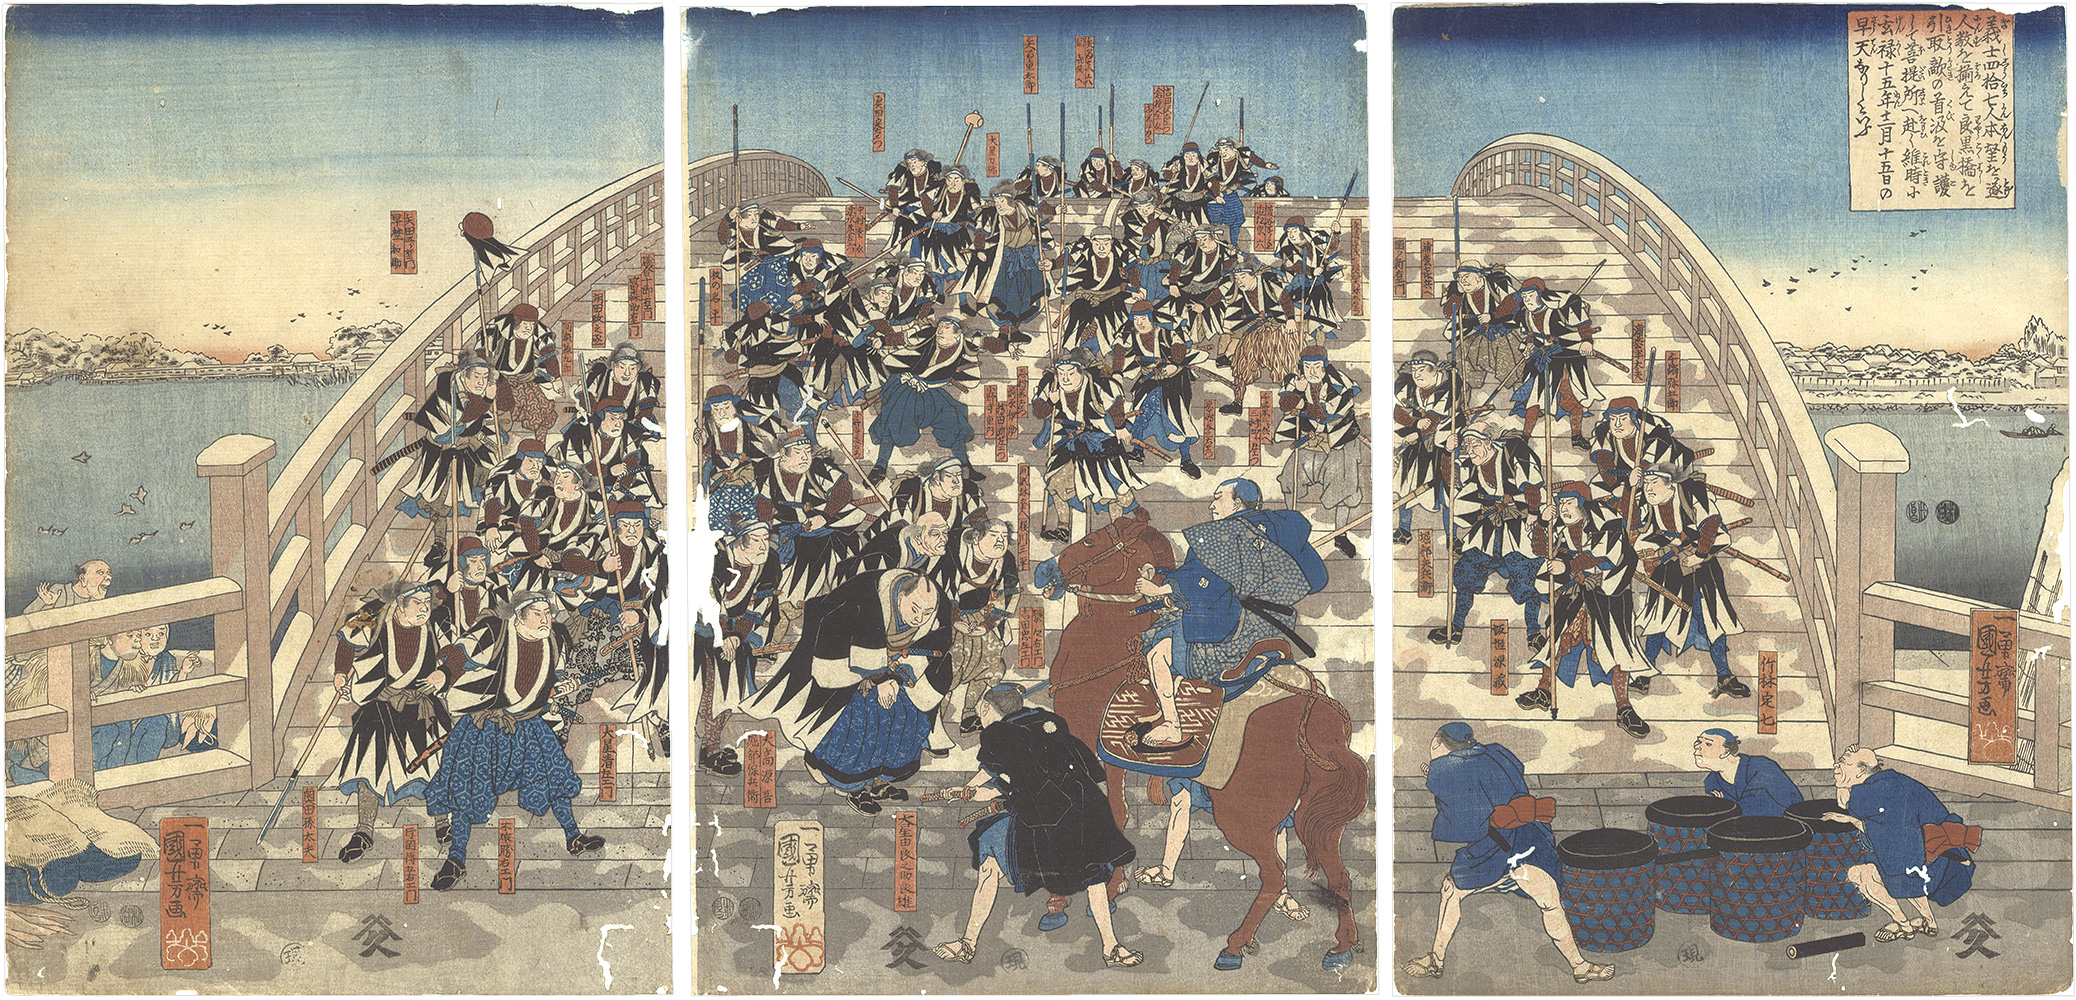 Kuniyoshi “Early in the Morning of the 15th Day of the 12th Month, 1702, the 47 Loyal Retainers, Having Achieved Their Goal, All Crossed Ryogoku Bridge with the Head of Their Enemy and Proceeded to the Memorial Temple”／